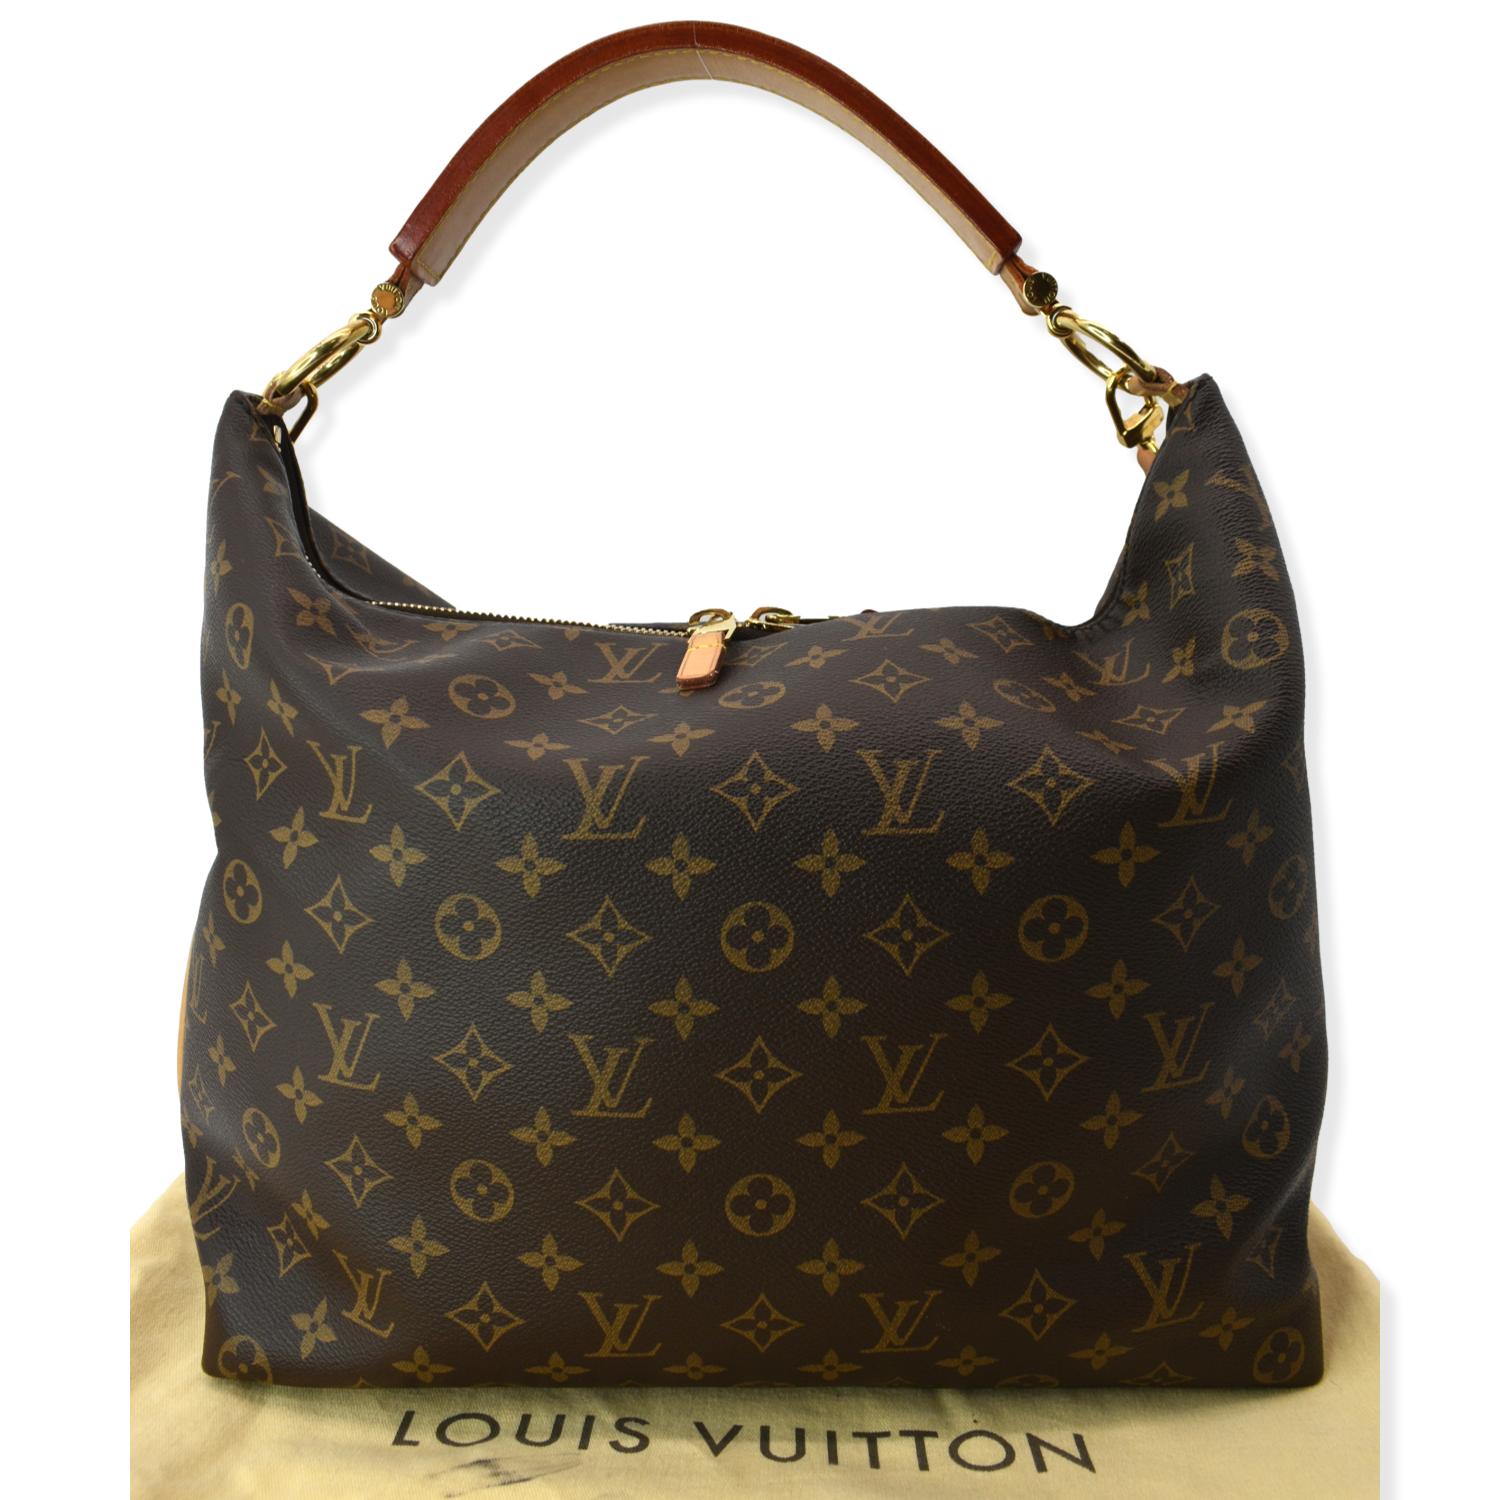 New Authentic Sully MM Monogram louis vuitton bag for Sale in